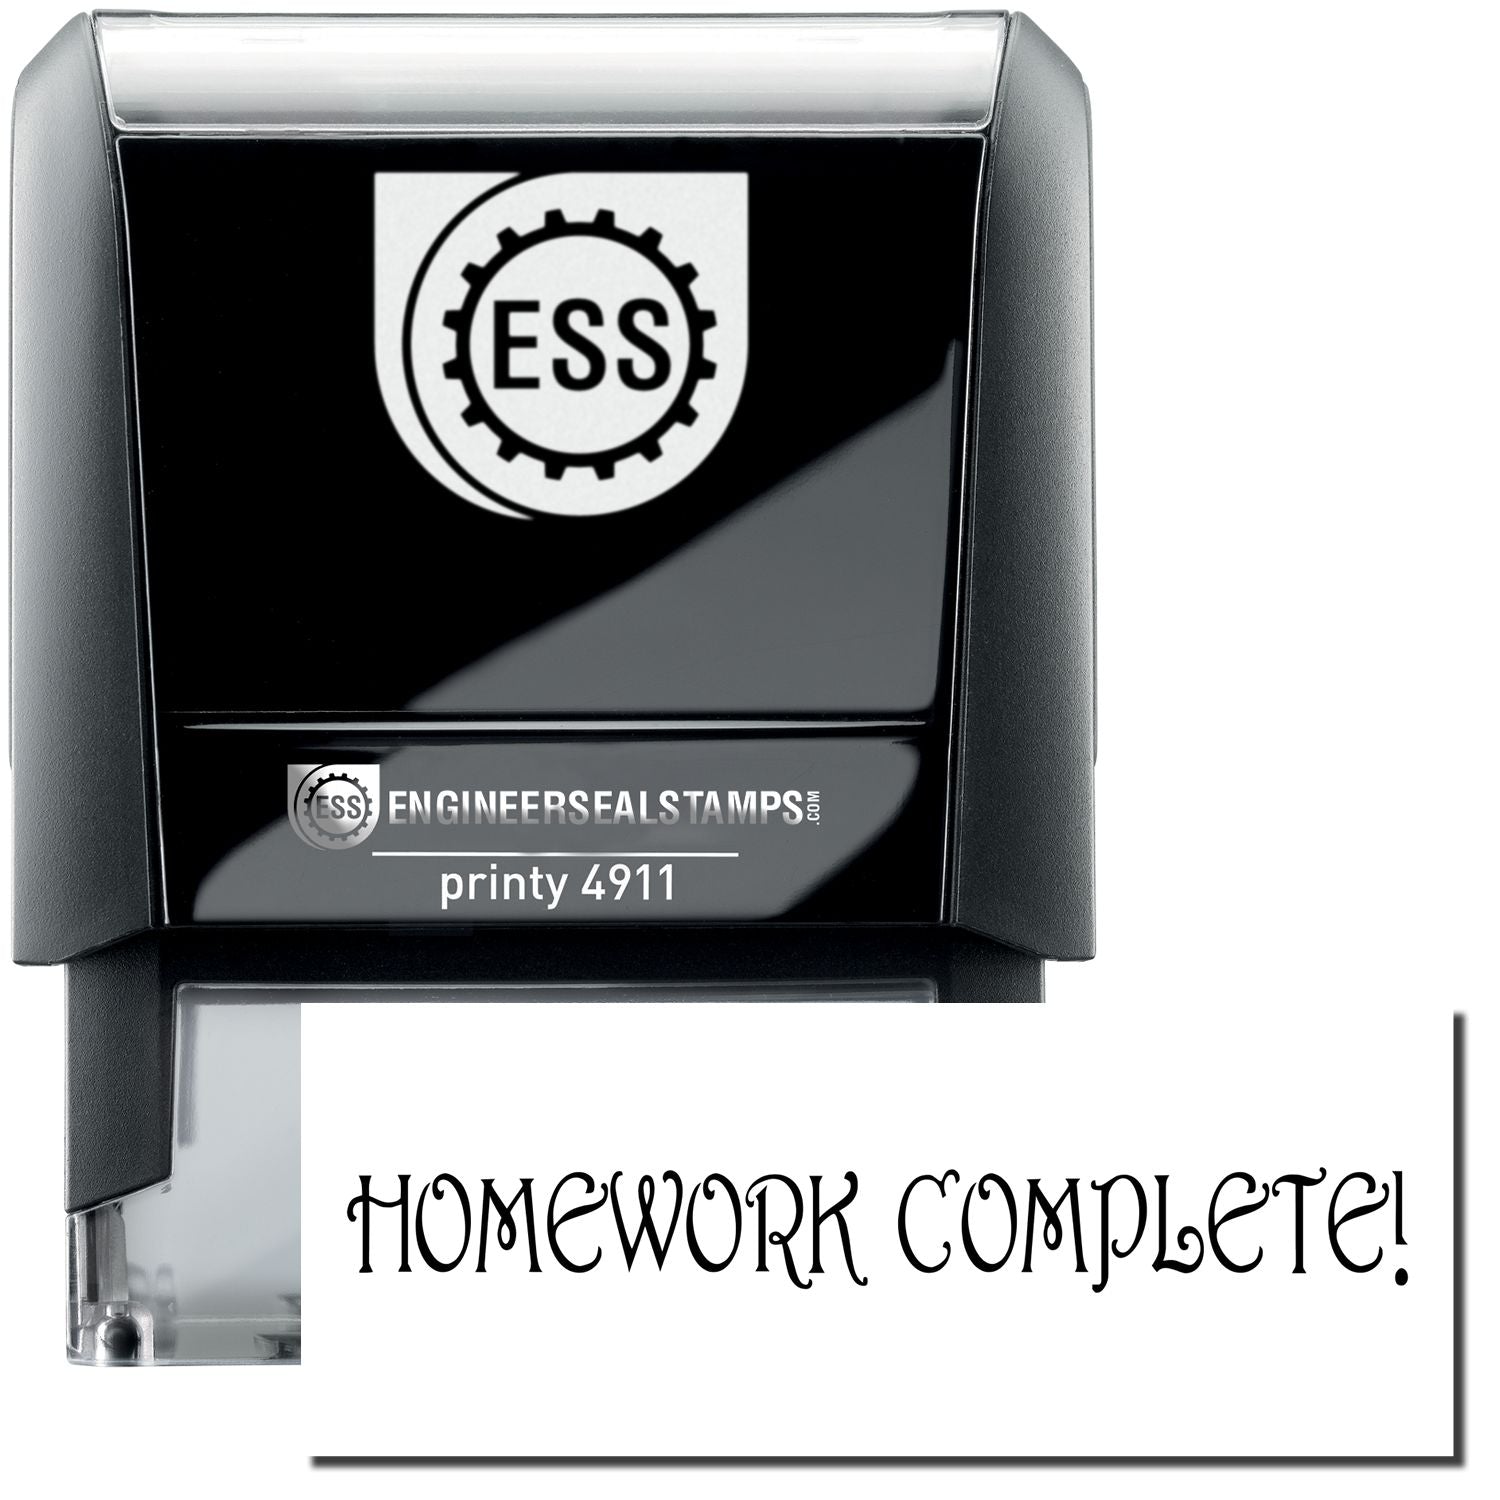 A self-inking stamp with a stamped image showing how the text "HOMEWORK COMPLETE!" is displayed after stamping.